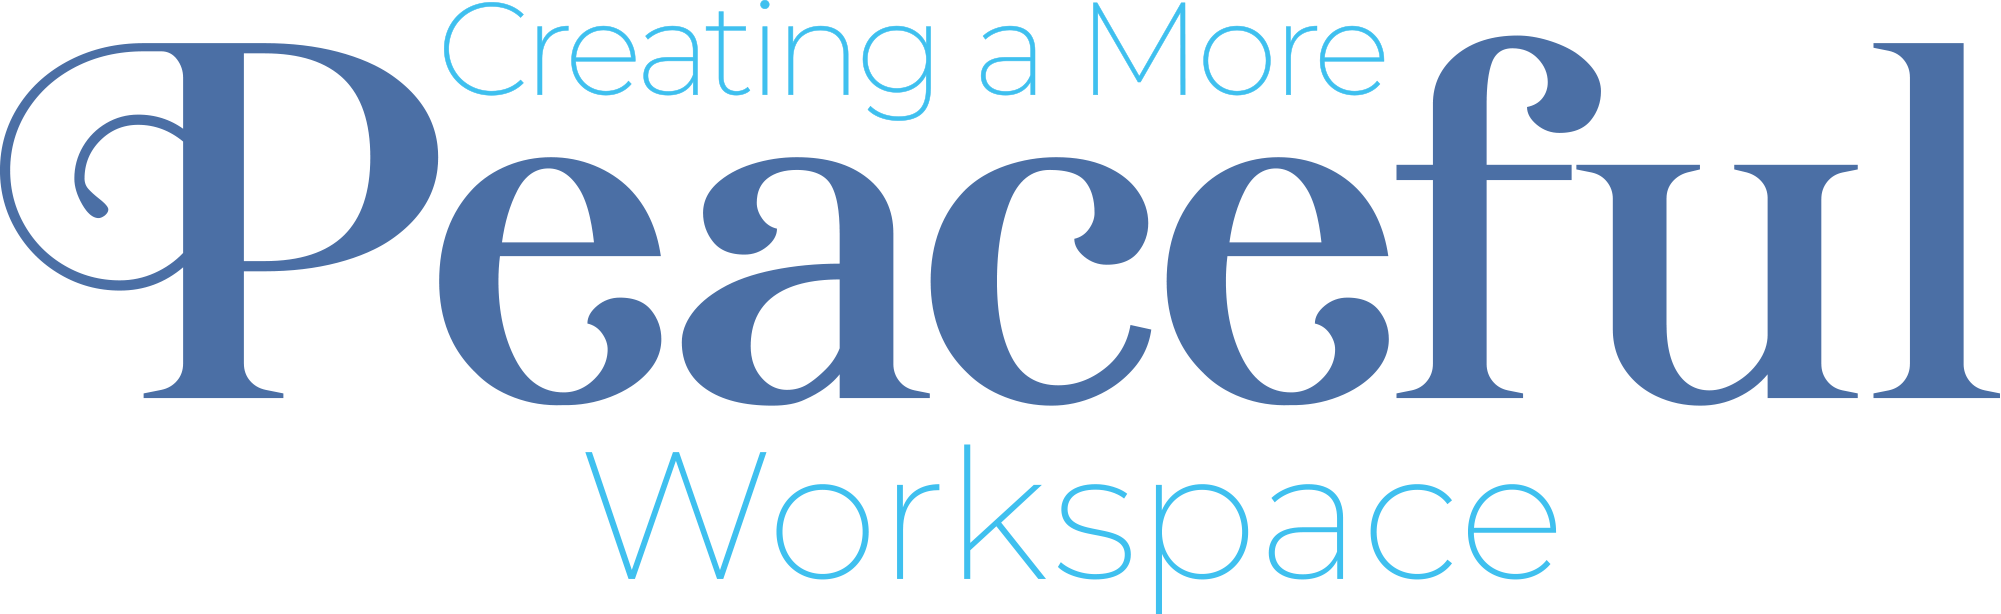 Creating a More Peaceful Workspace